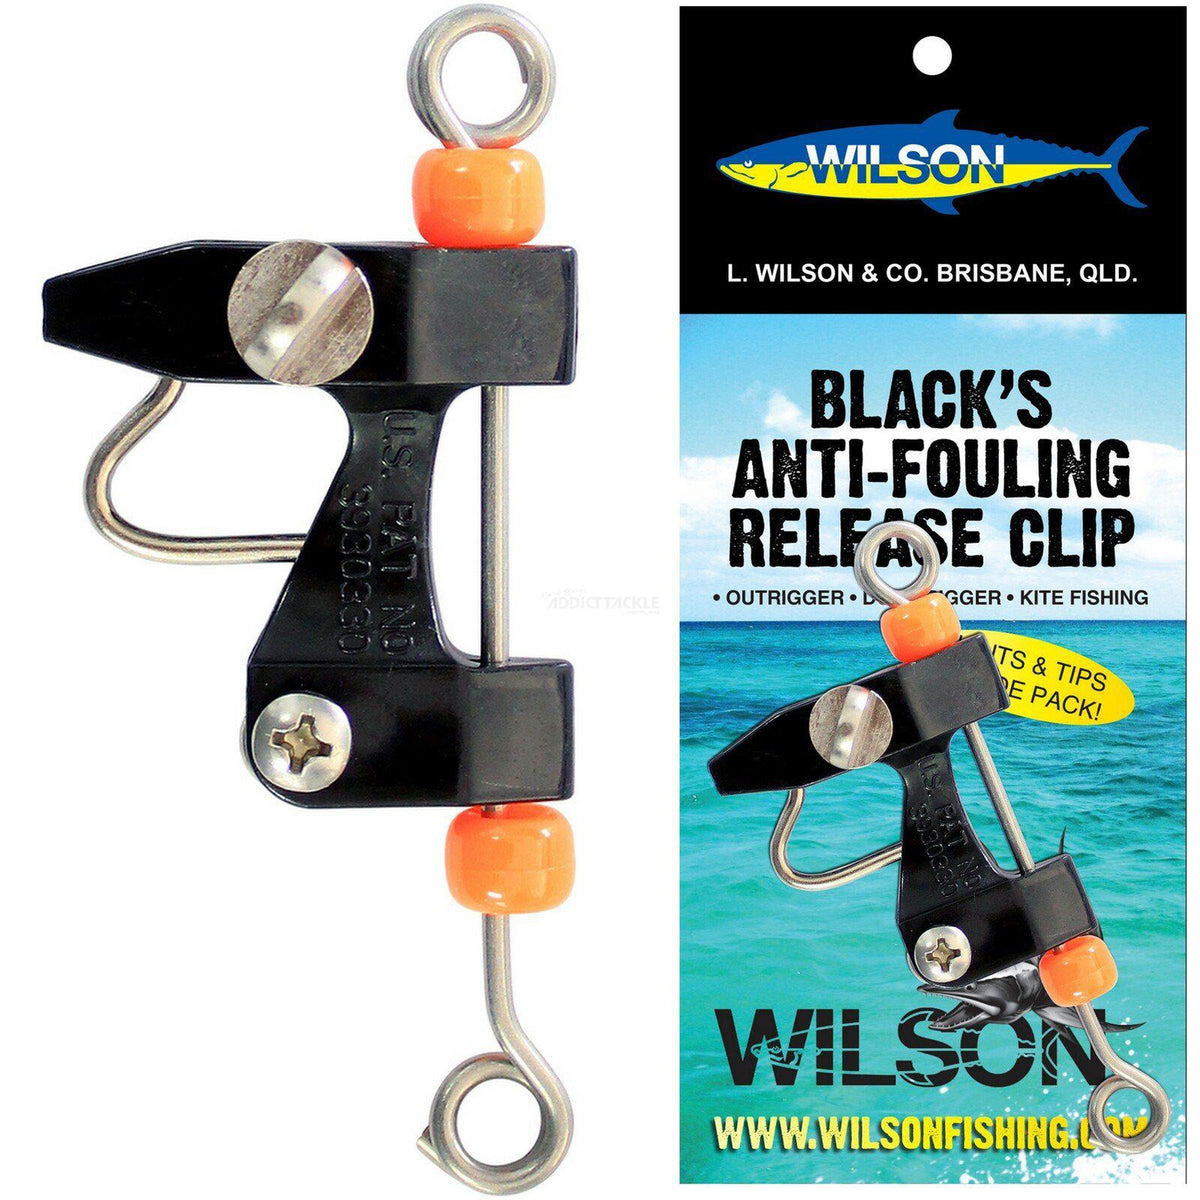 https://cdn.shopify.com/s/files/1/0014/5670/1549/products/wilson-black-anti-fouling-outrigger-release-clip-2_1200x.jpg?v=1684477468